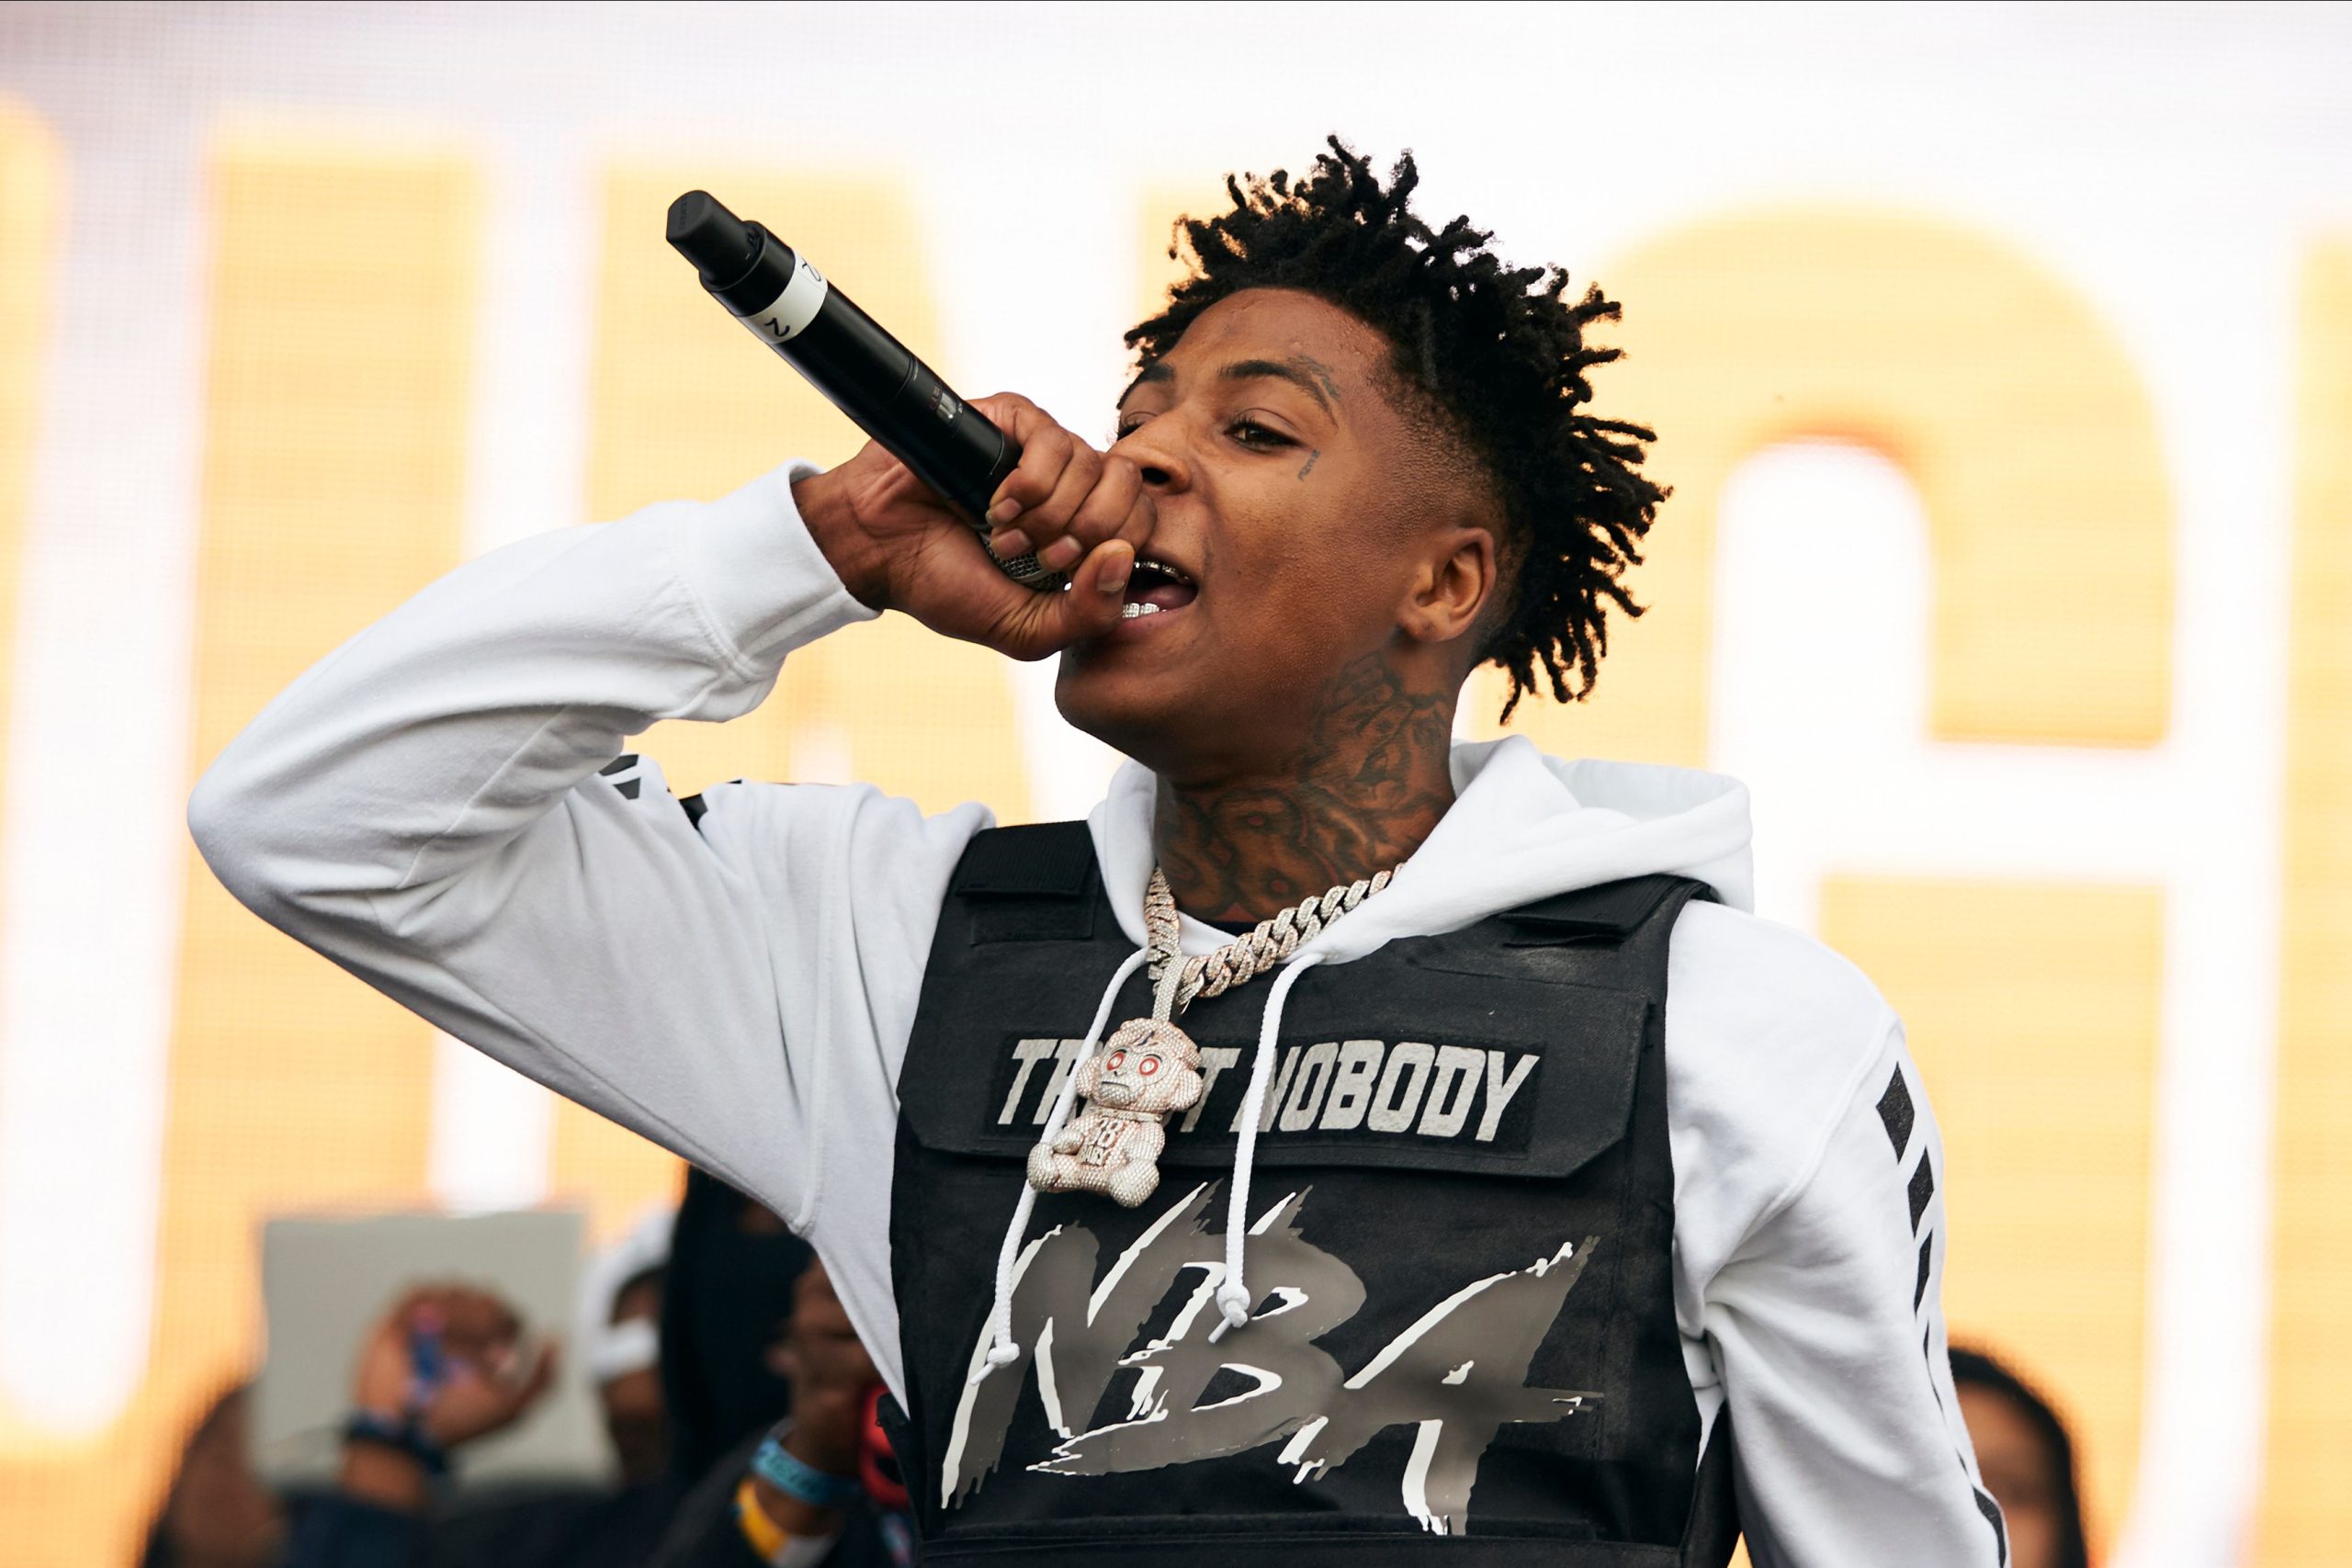 NBA YoungBoy's New Album Ma' I Got a Family Is Streaming Now